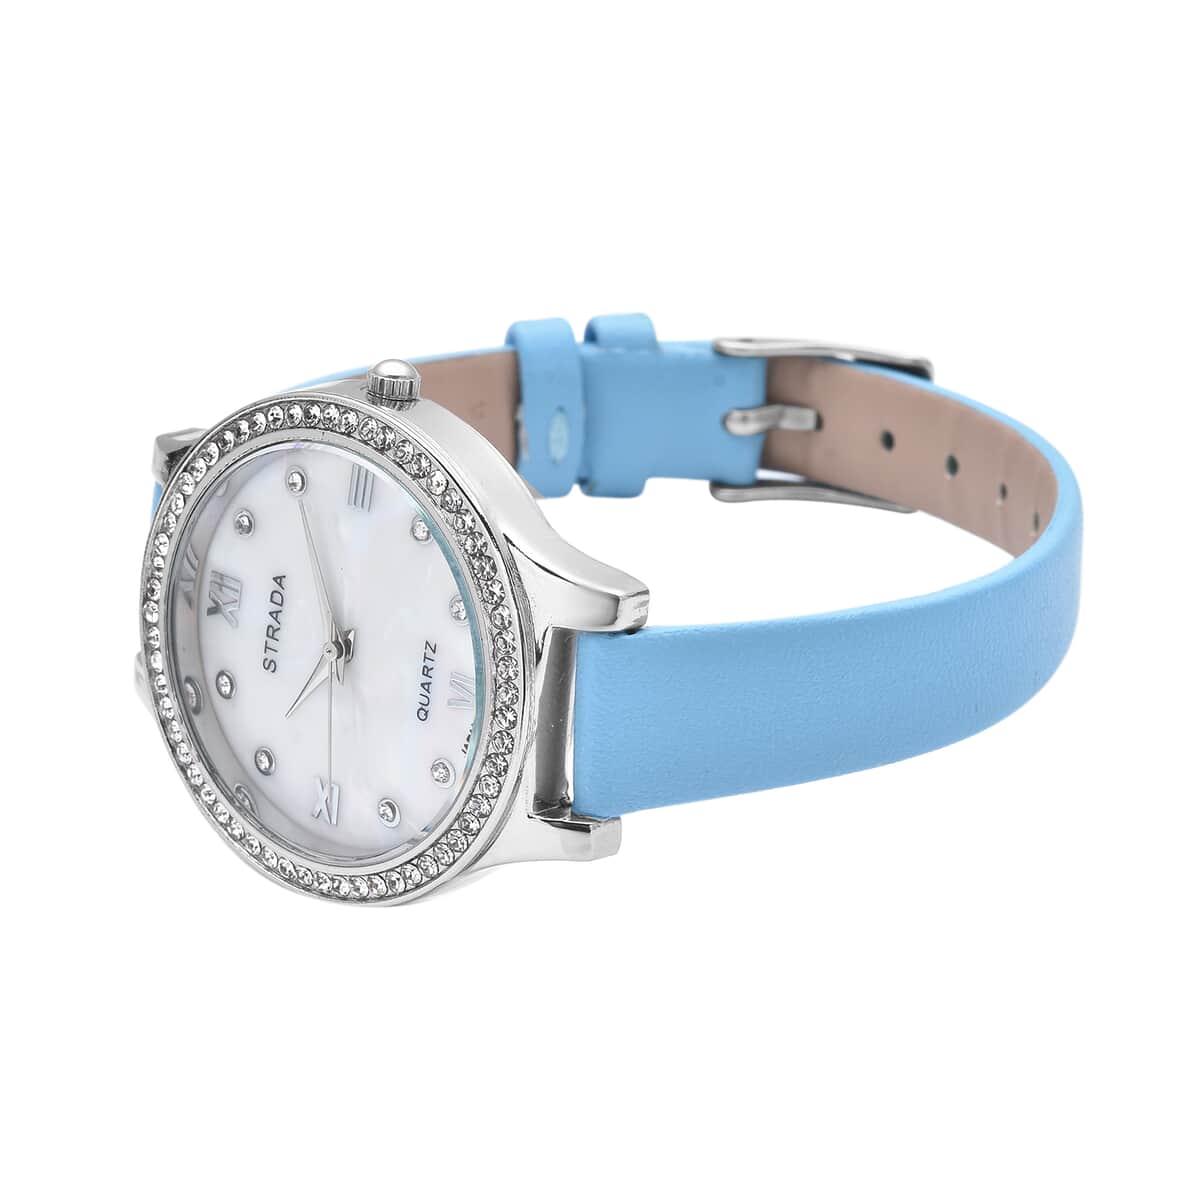 Strada Austrian Crystal Japanese Movement Watch with Turquoise Blue Faux Leather Strap image number 4